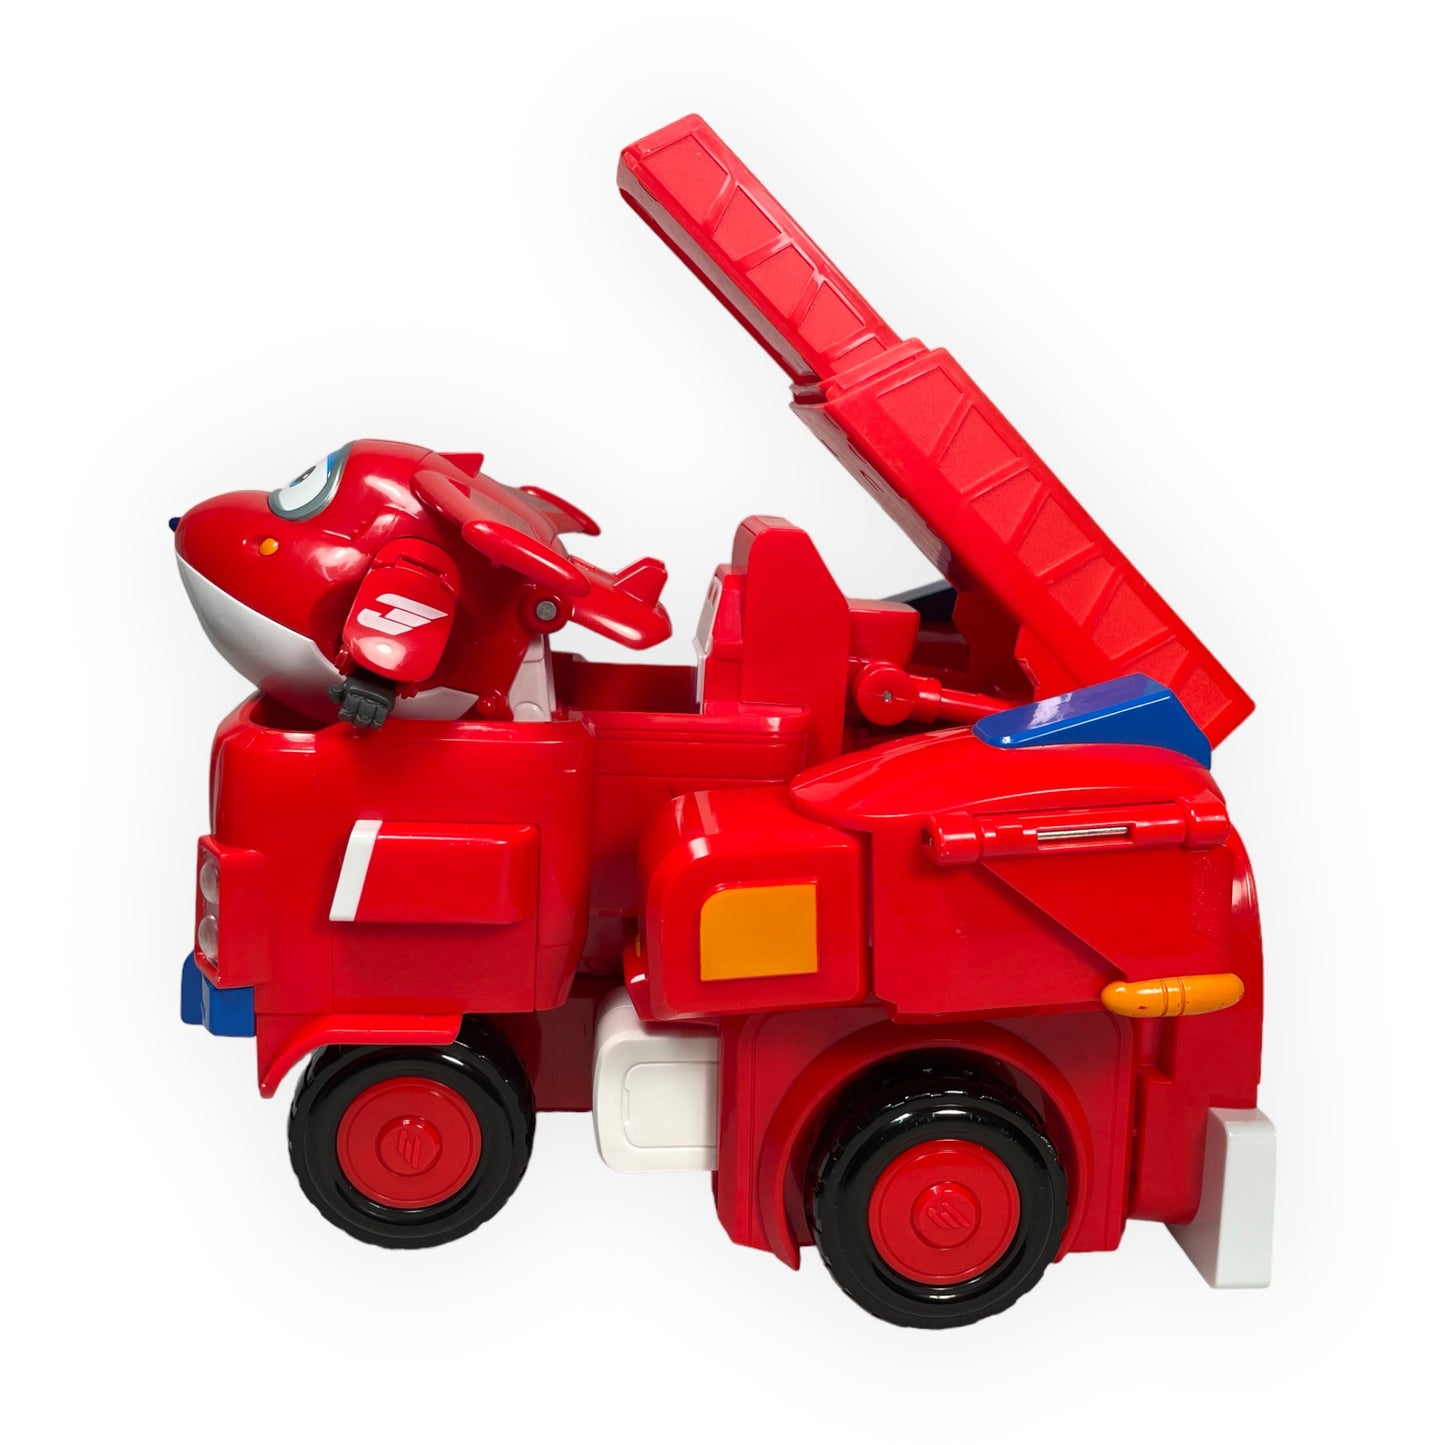 Super Wings - 35cm Transforming Jett's Super Robot Airplane Toys Vehicle Action Figure | Plane to Robot